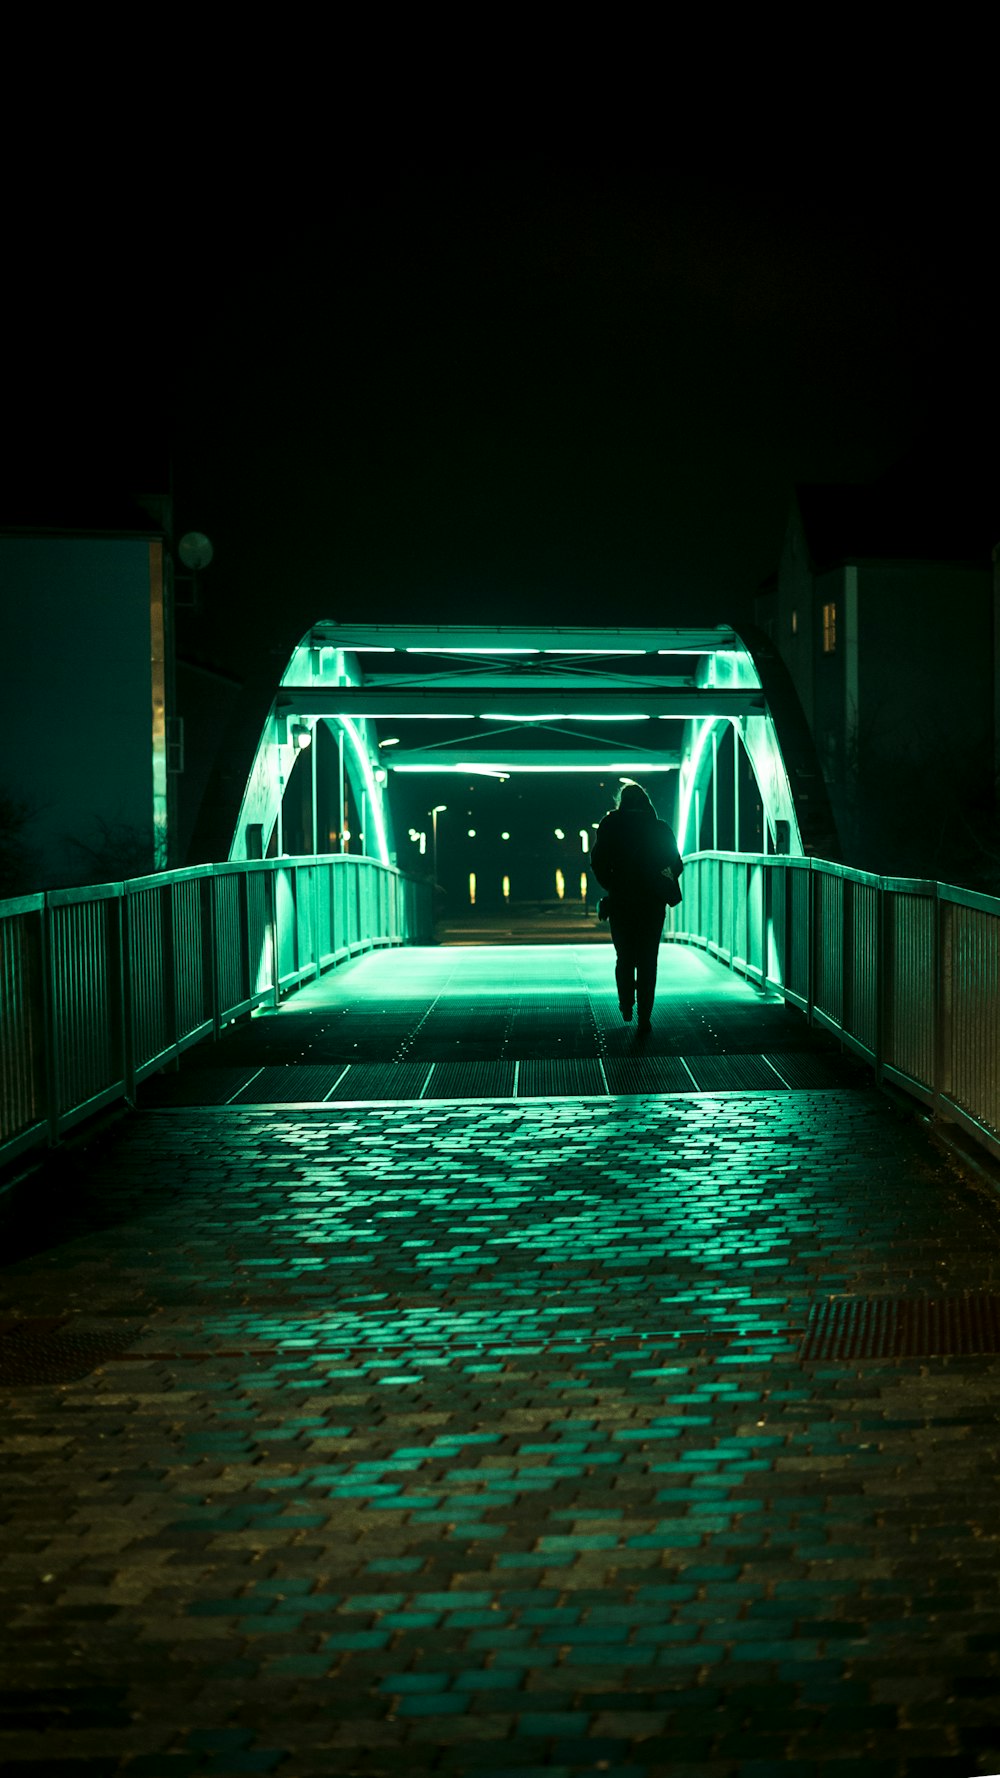 person passing alone on bridge during nighttime